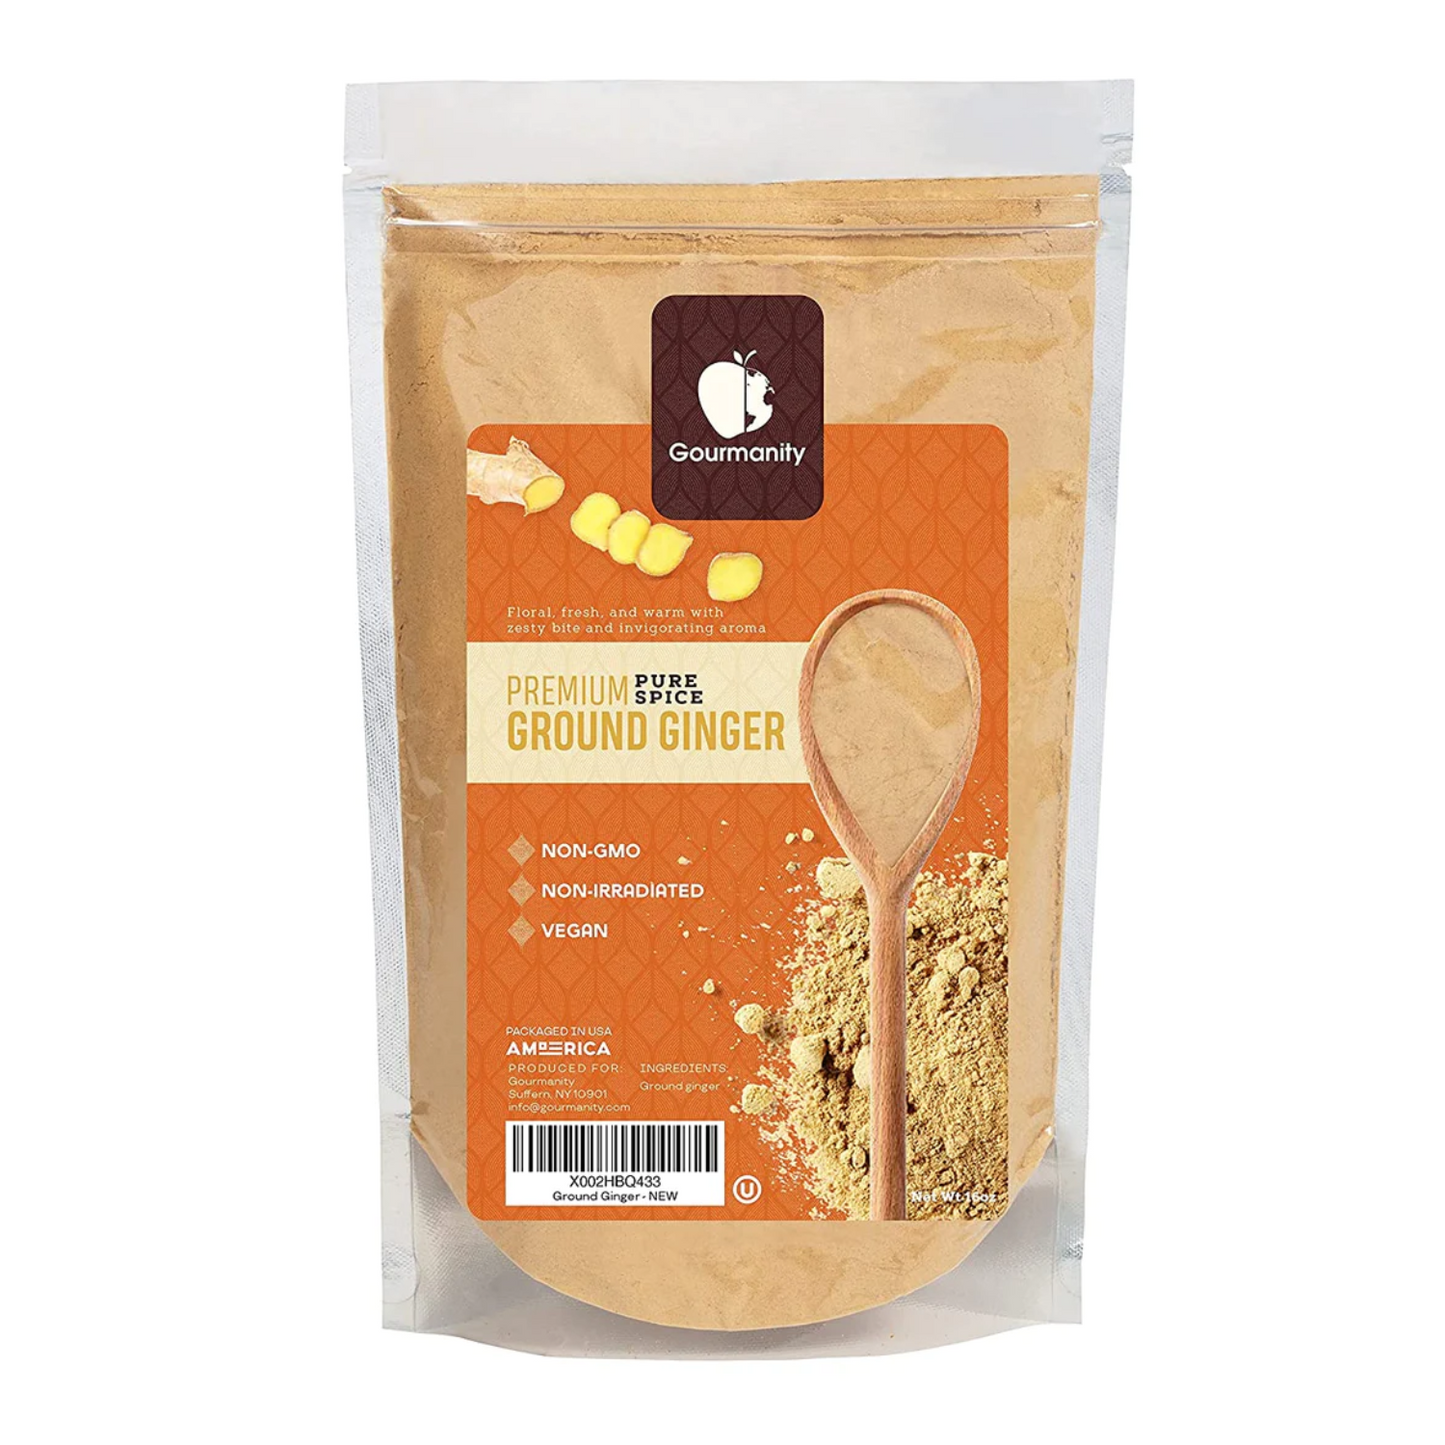 Gourmanity Ground Ginger 1lb - Gourmanity